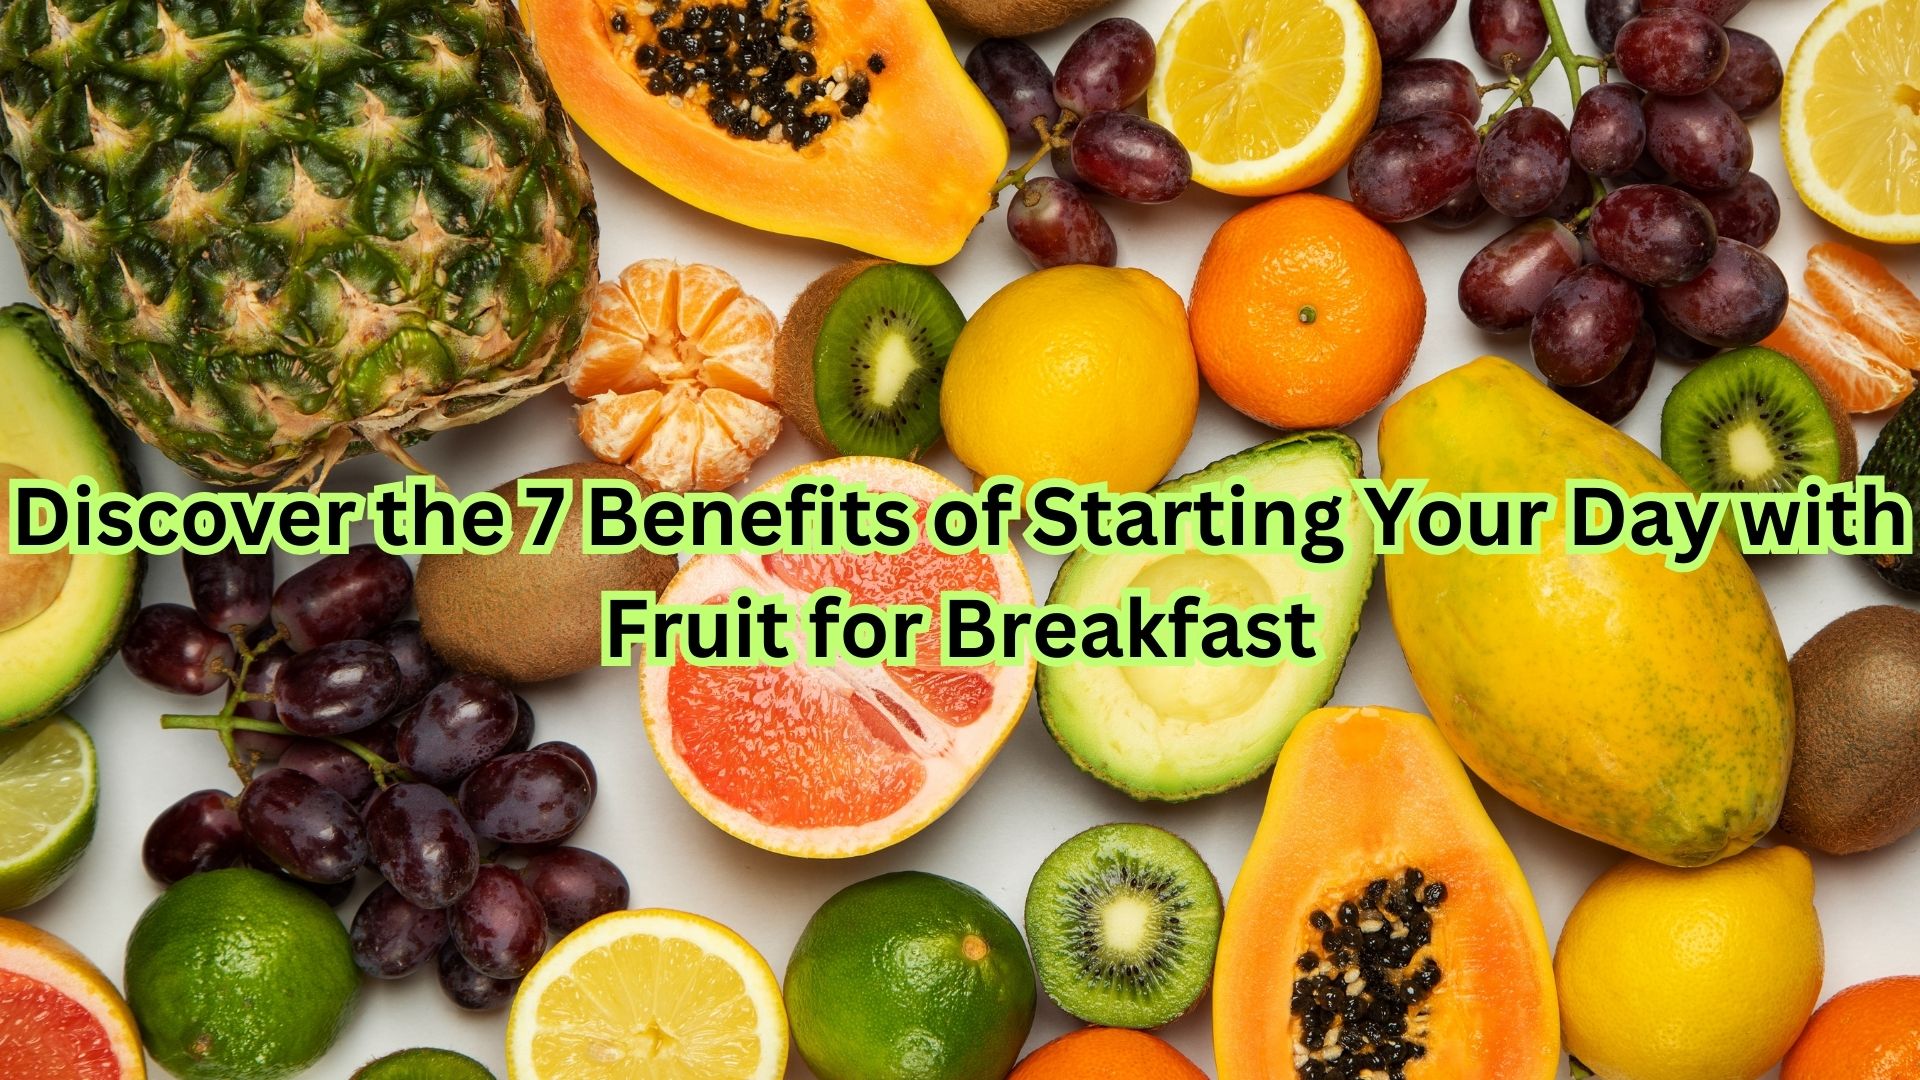 Discover the 7 Benefits of Starting Your Day with Fruit for Breakfast